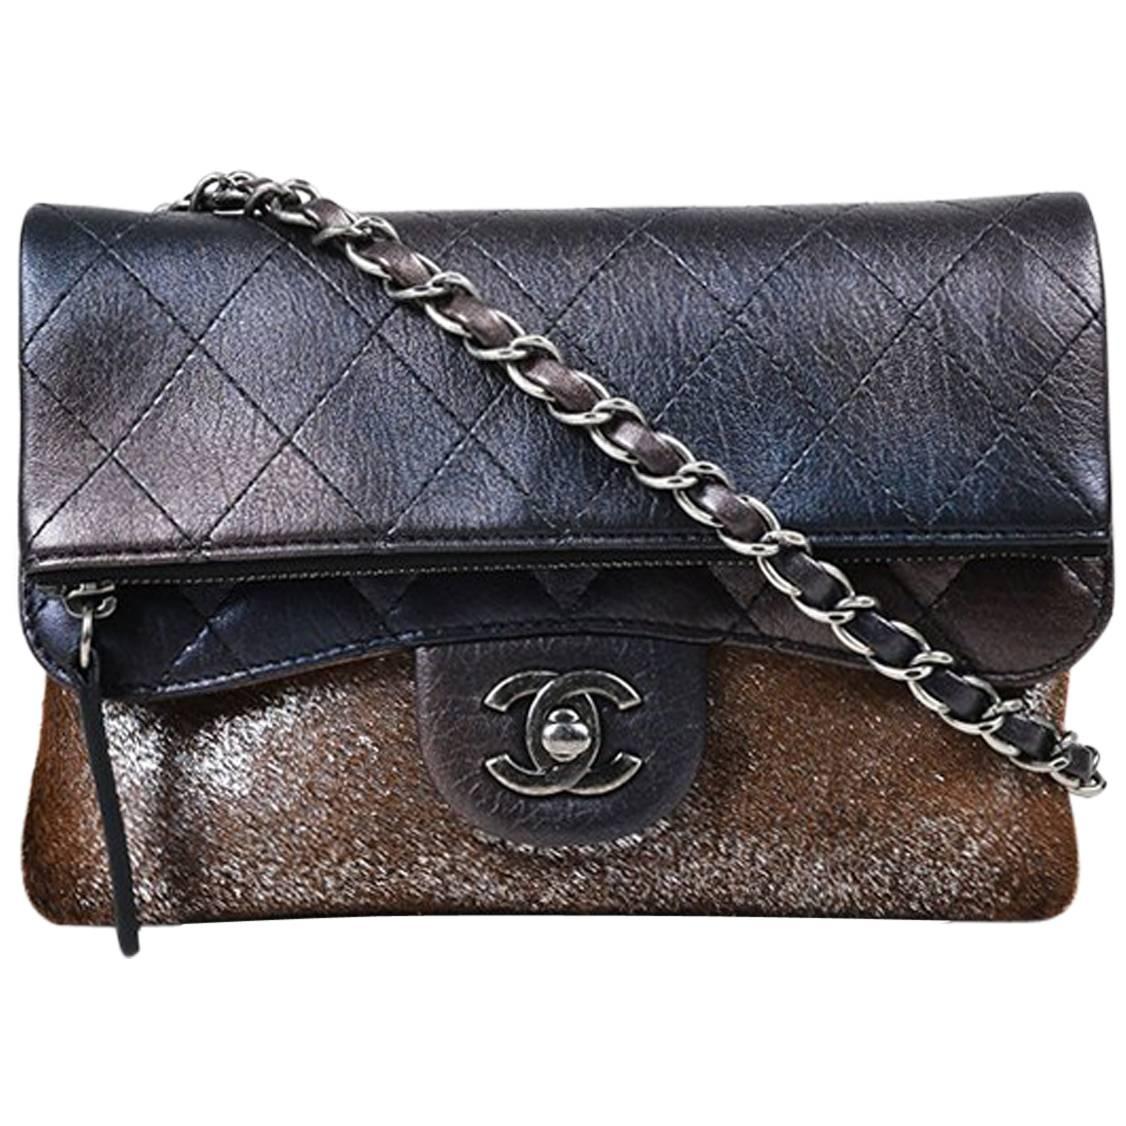 Chanel Brown Purple Ombre Iridescent Leather Pony Hair Double Flap Bag For Sale